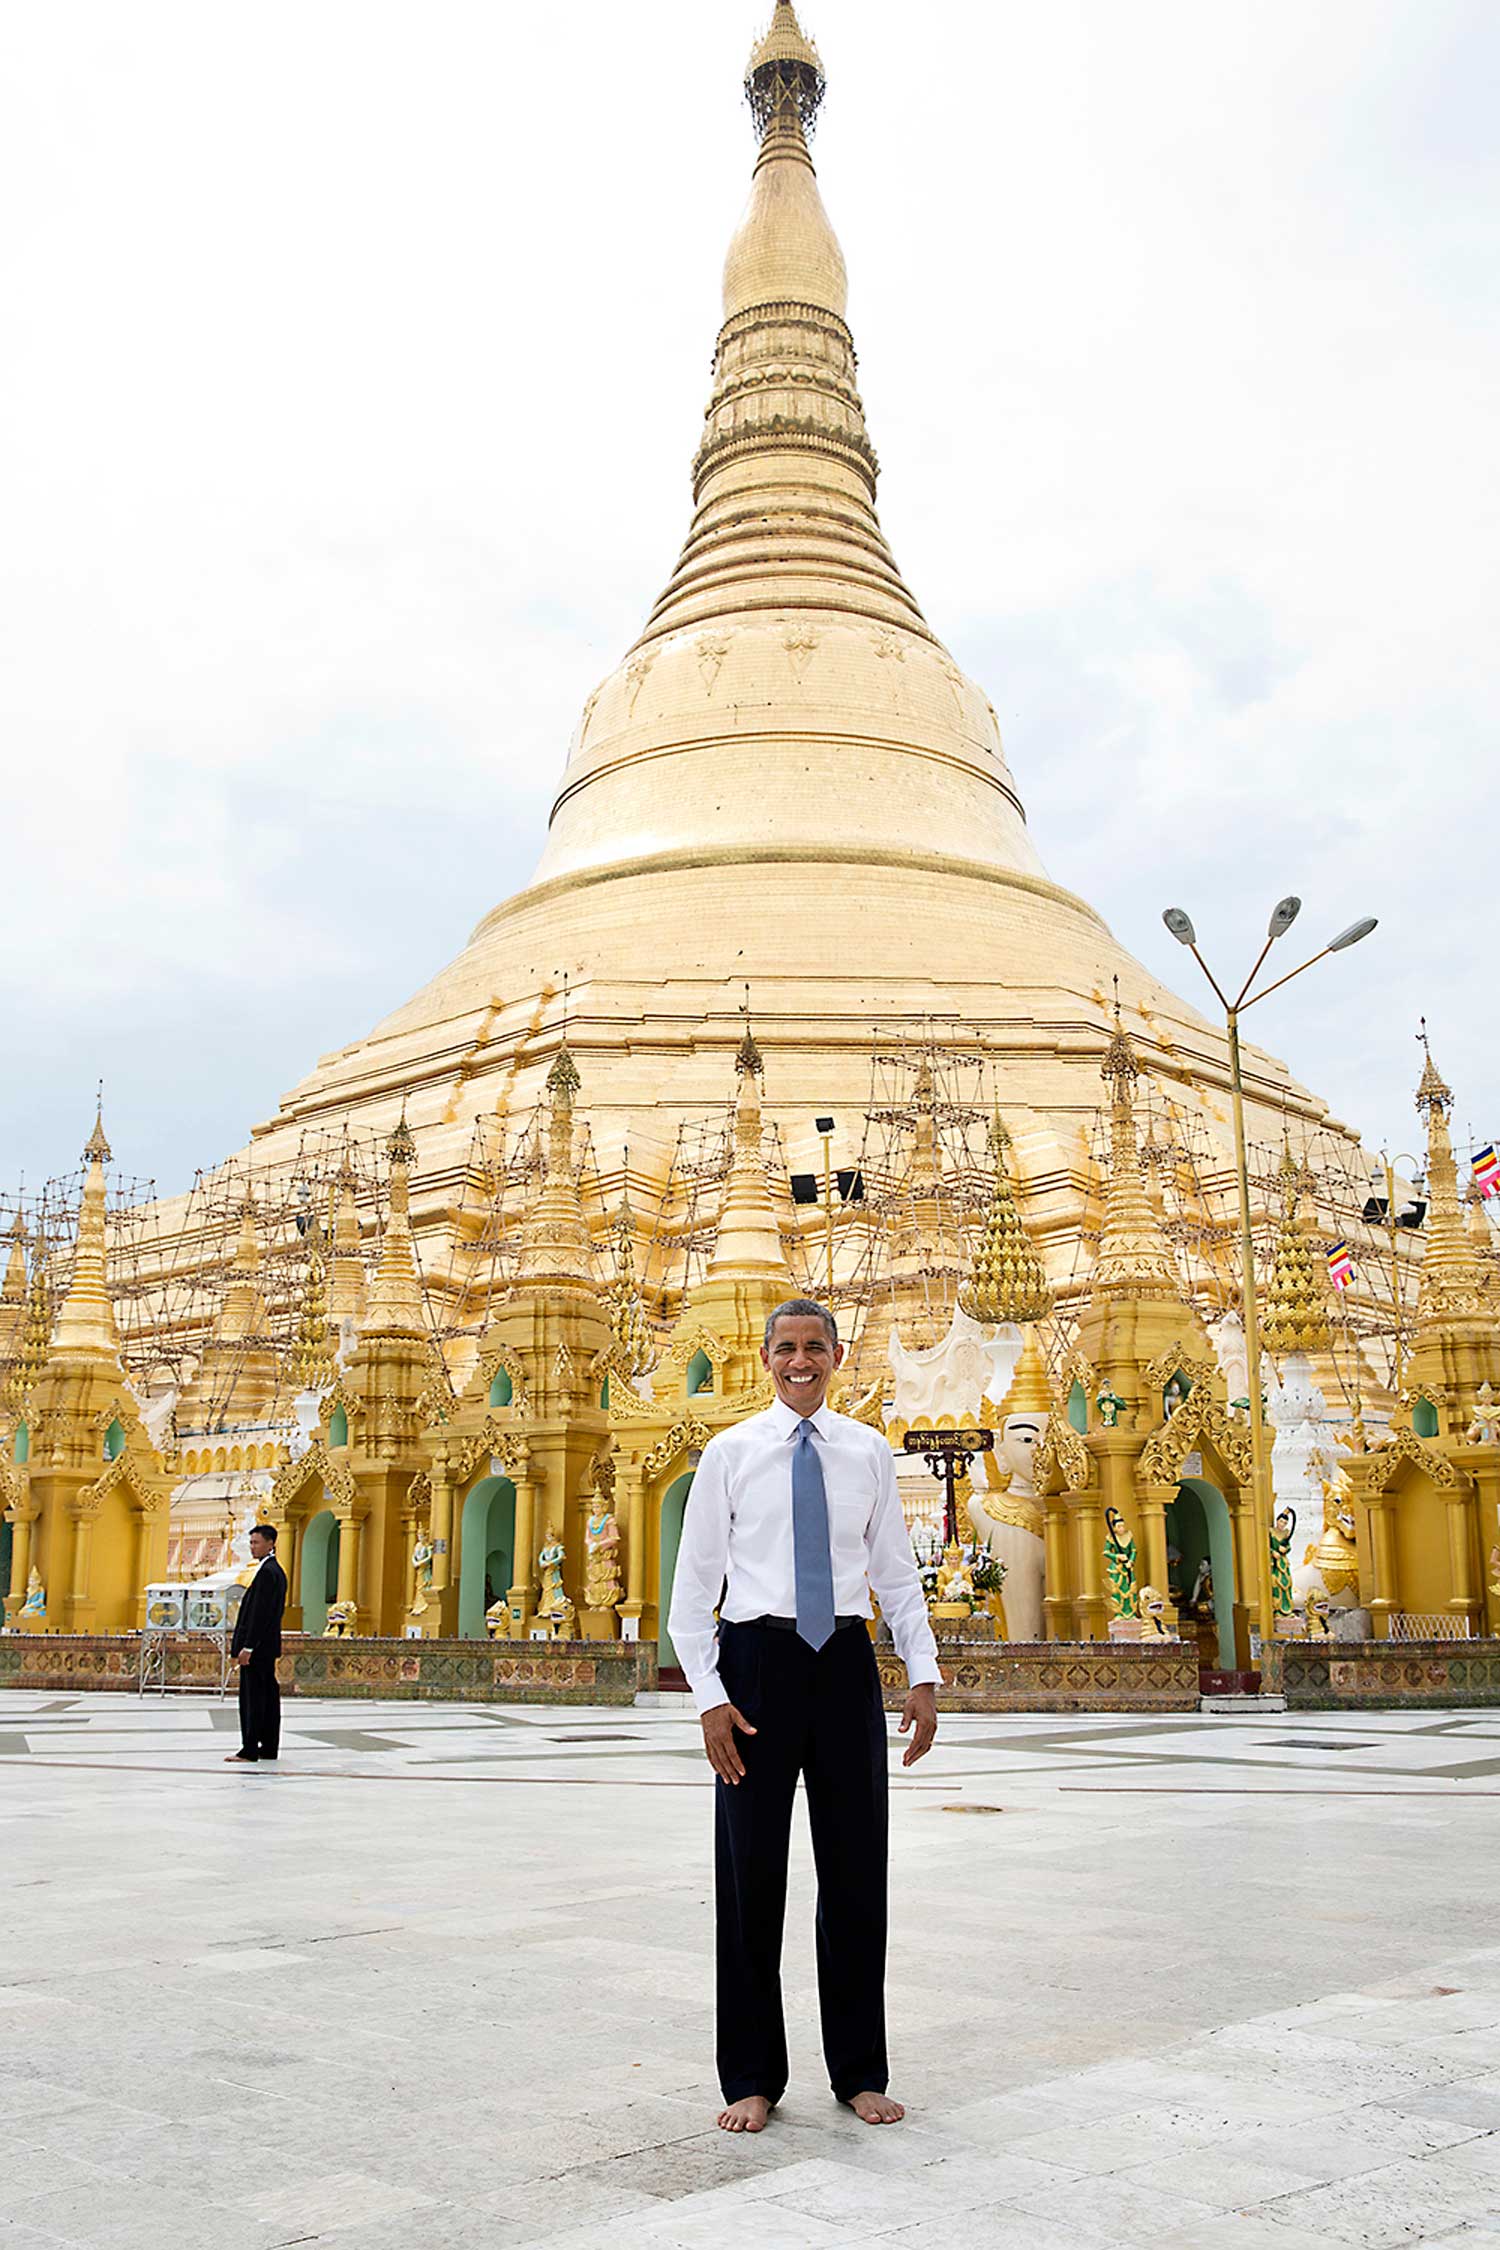 To some, this is a snapshot and doesn't belong in this gallery of candid photographs. But to me, it evokes what the trip to Burma was all about. Here is the President of the United States, shoes and socks off in respect, posing as a tourist in front of the oldest pagoda in the world in a country that no U.S. President had ever been able to visit.